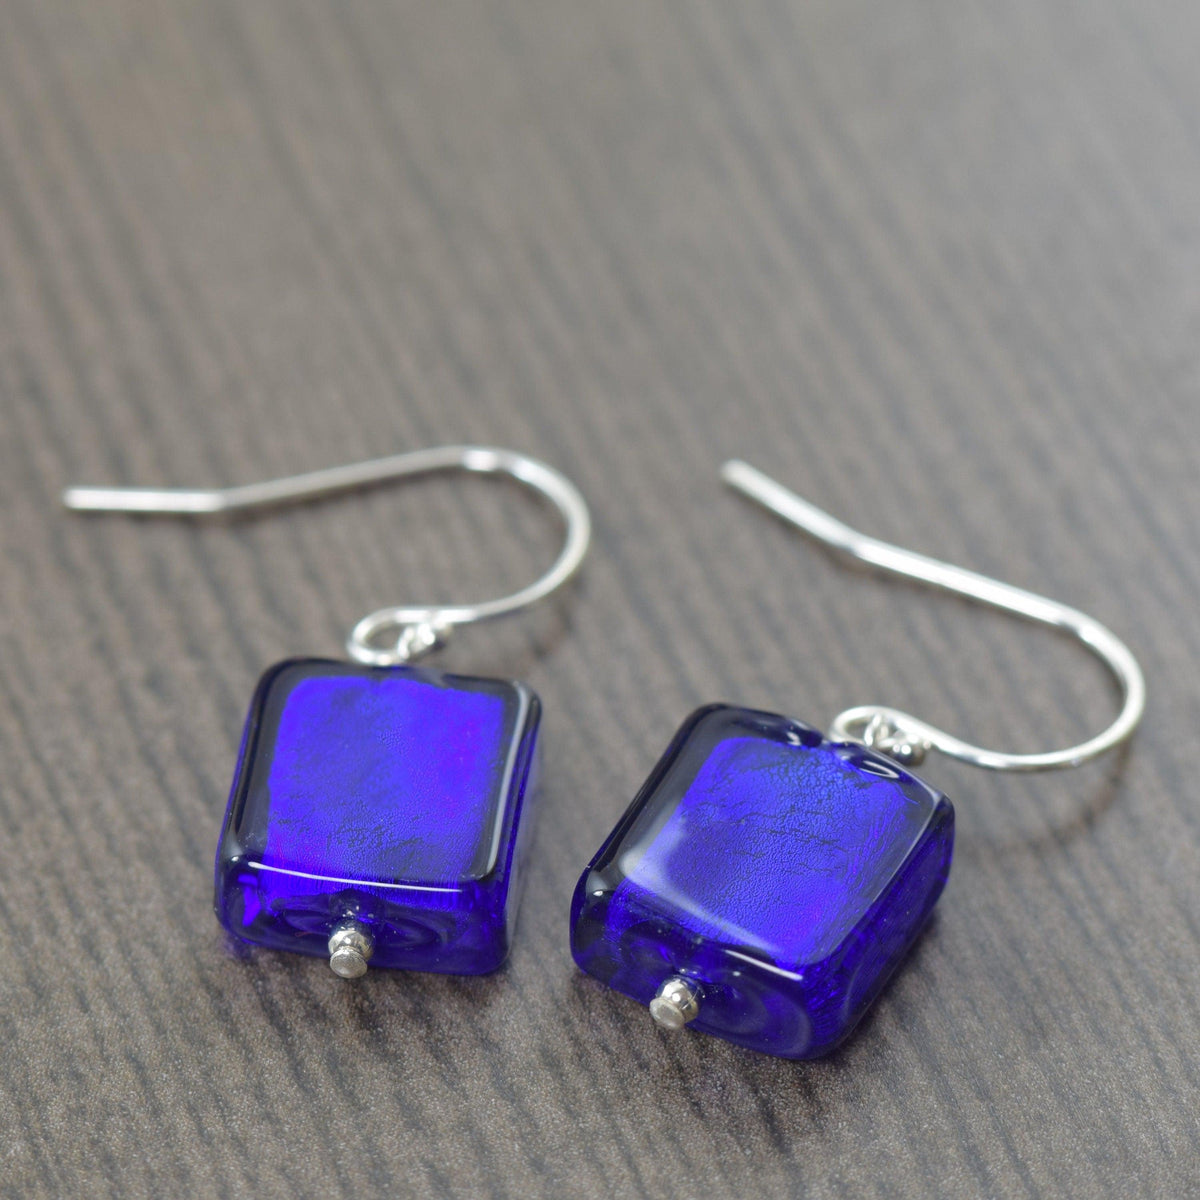 Blue Murano glass earrings - South Paw Studios Handcrafted